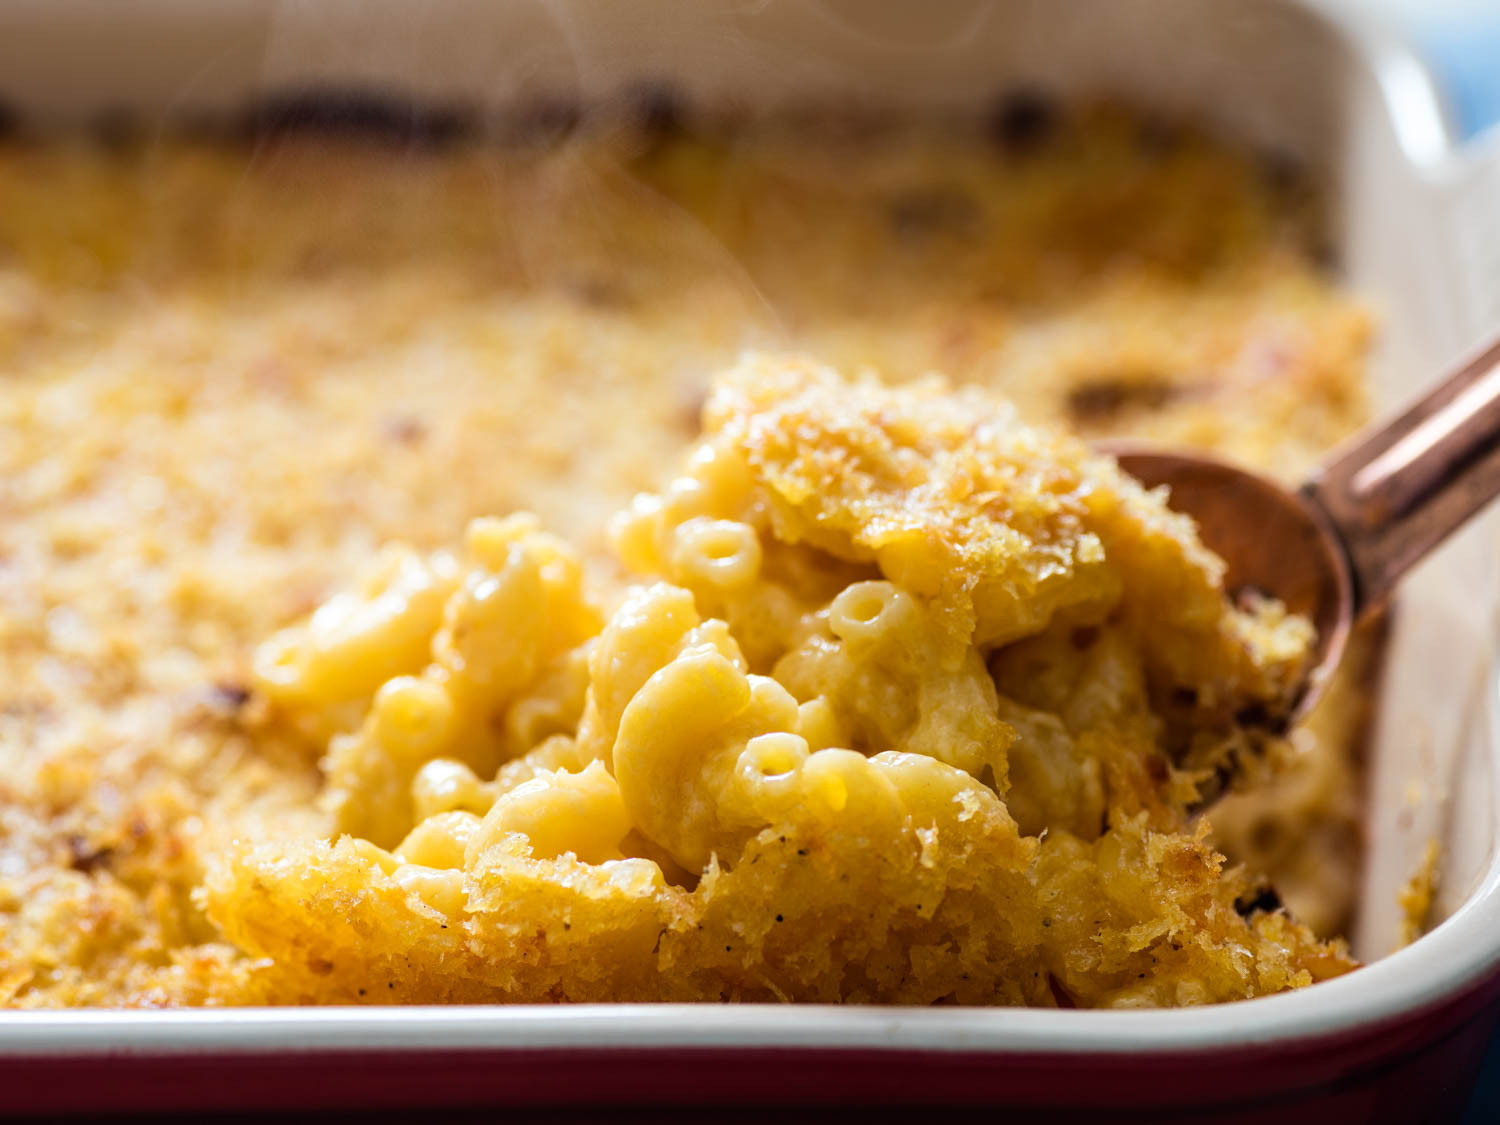 Award Winning Baked Macaroni And Cheese
 Two Roads to Gooey Stretchy Extra Cheesy Baked Mac and